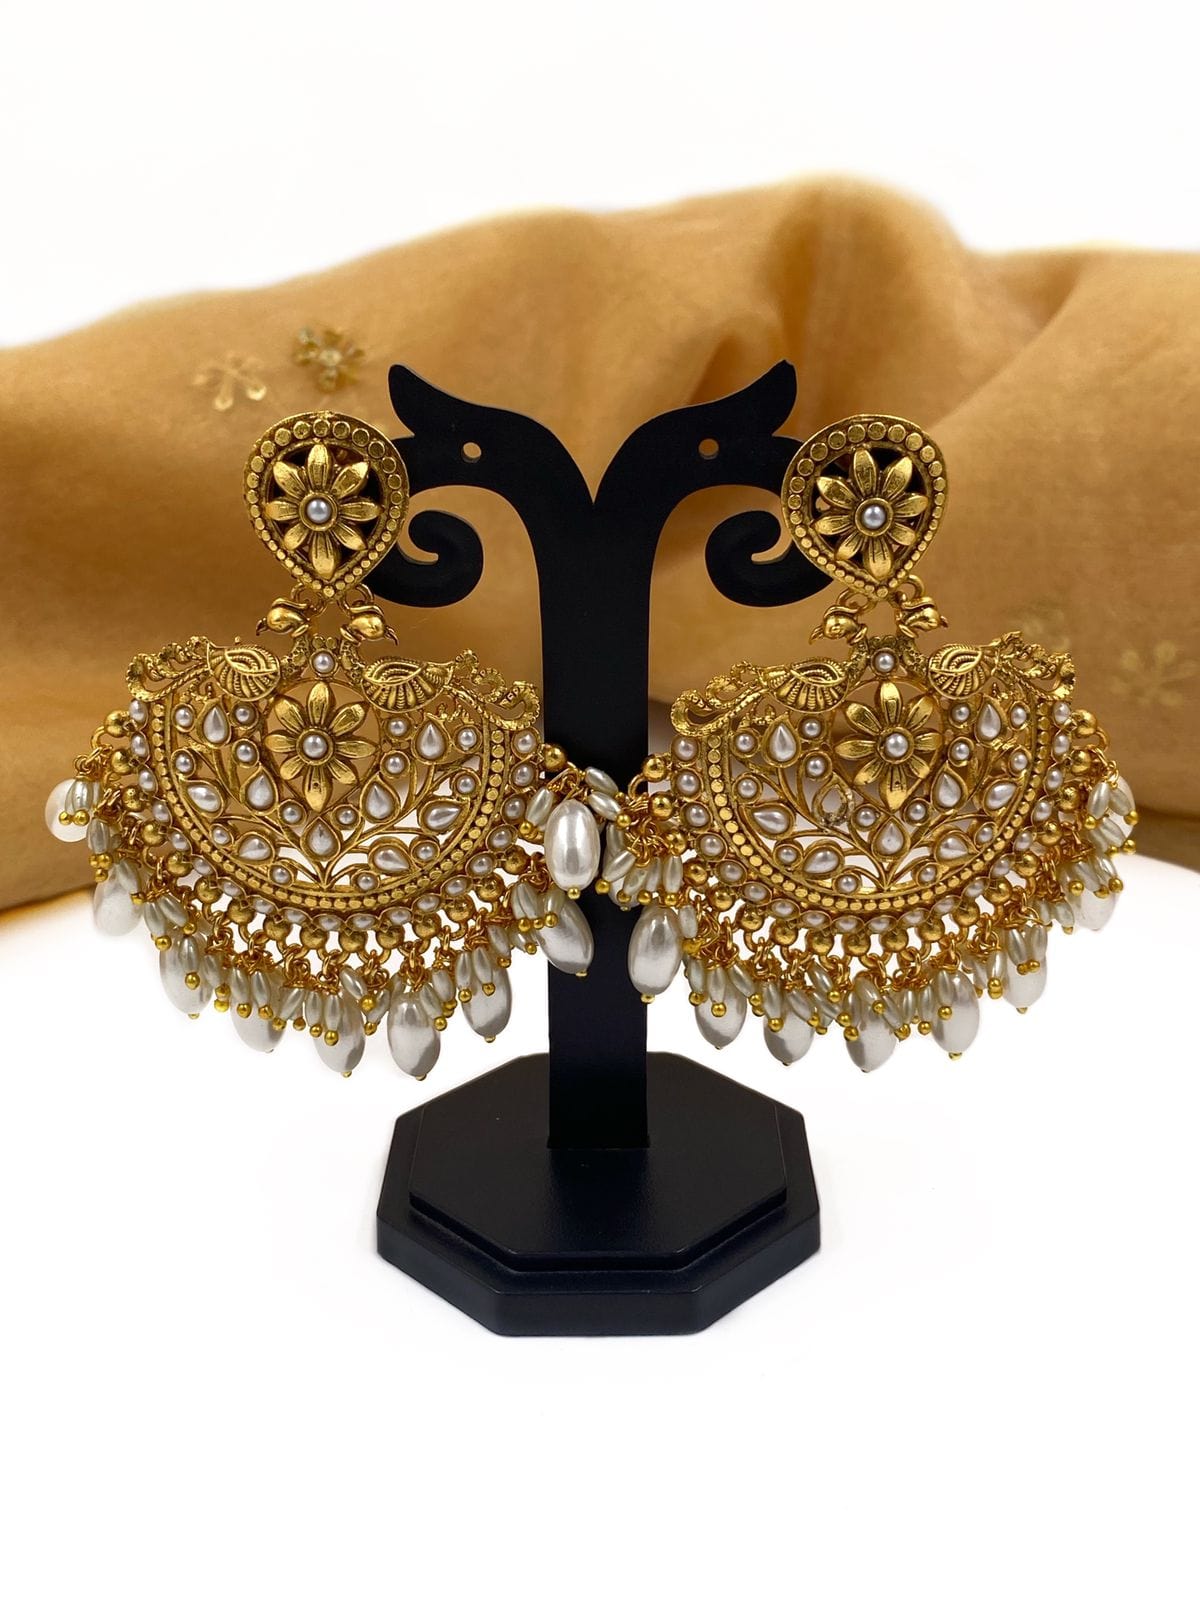 Exclusive Antique Gold Plated Golden Chandbali Earrings For Women By Gehna Shop Antique Earrings